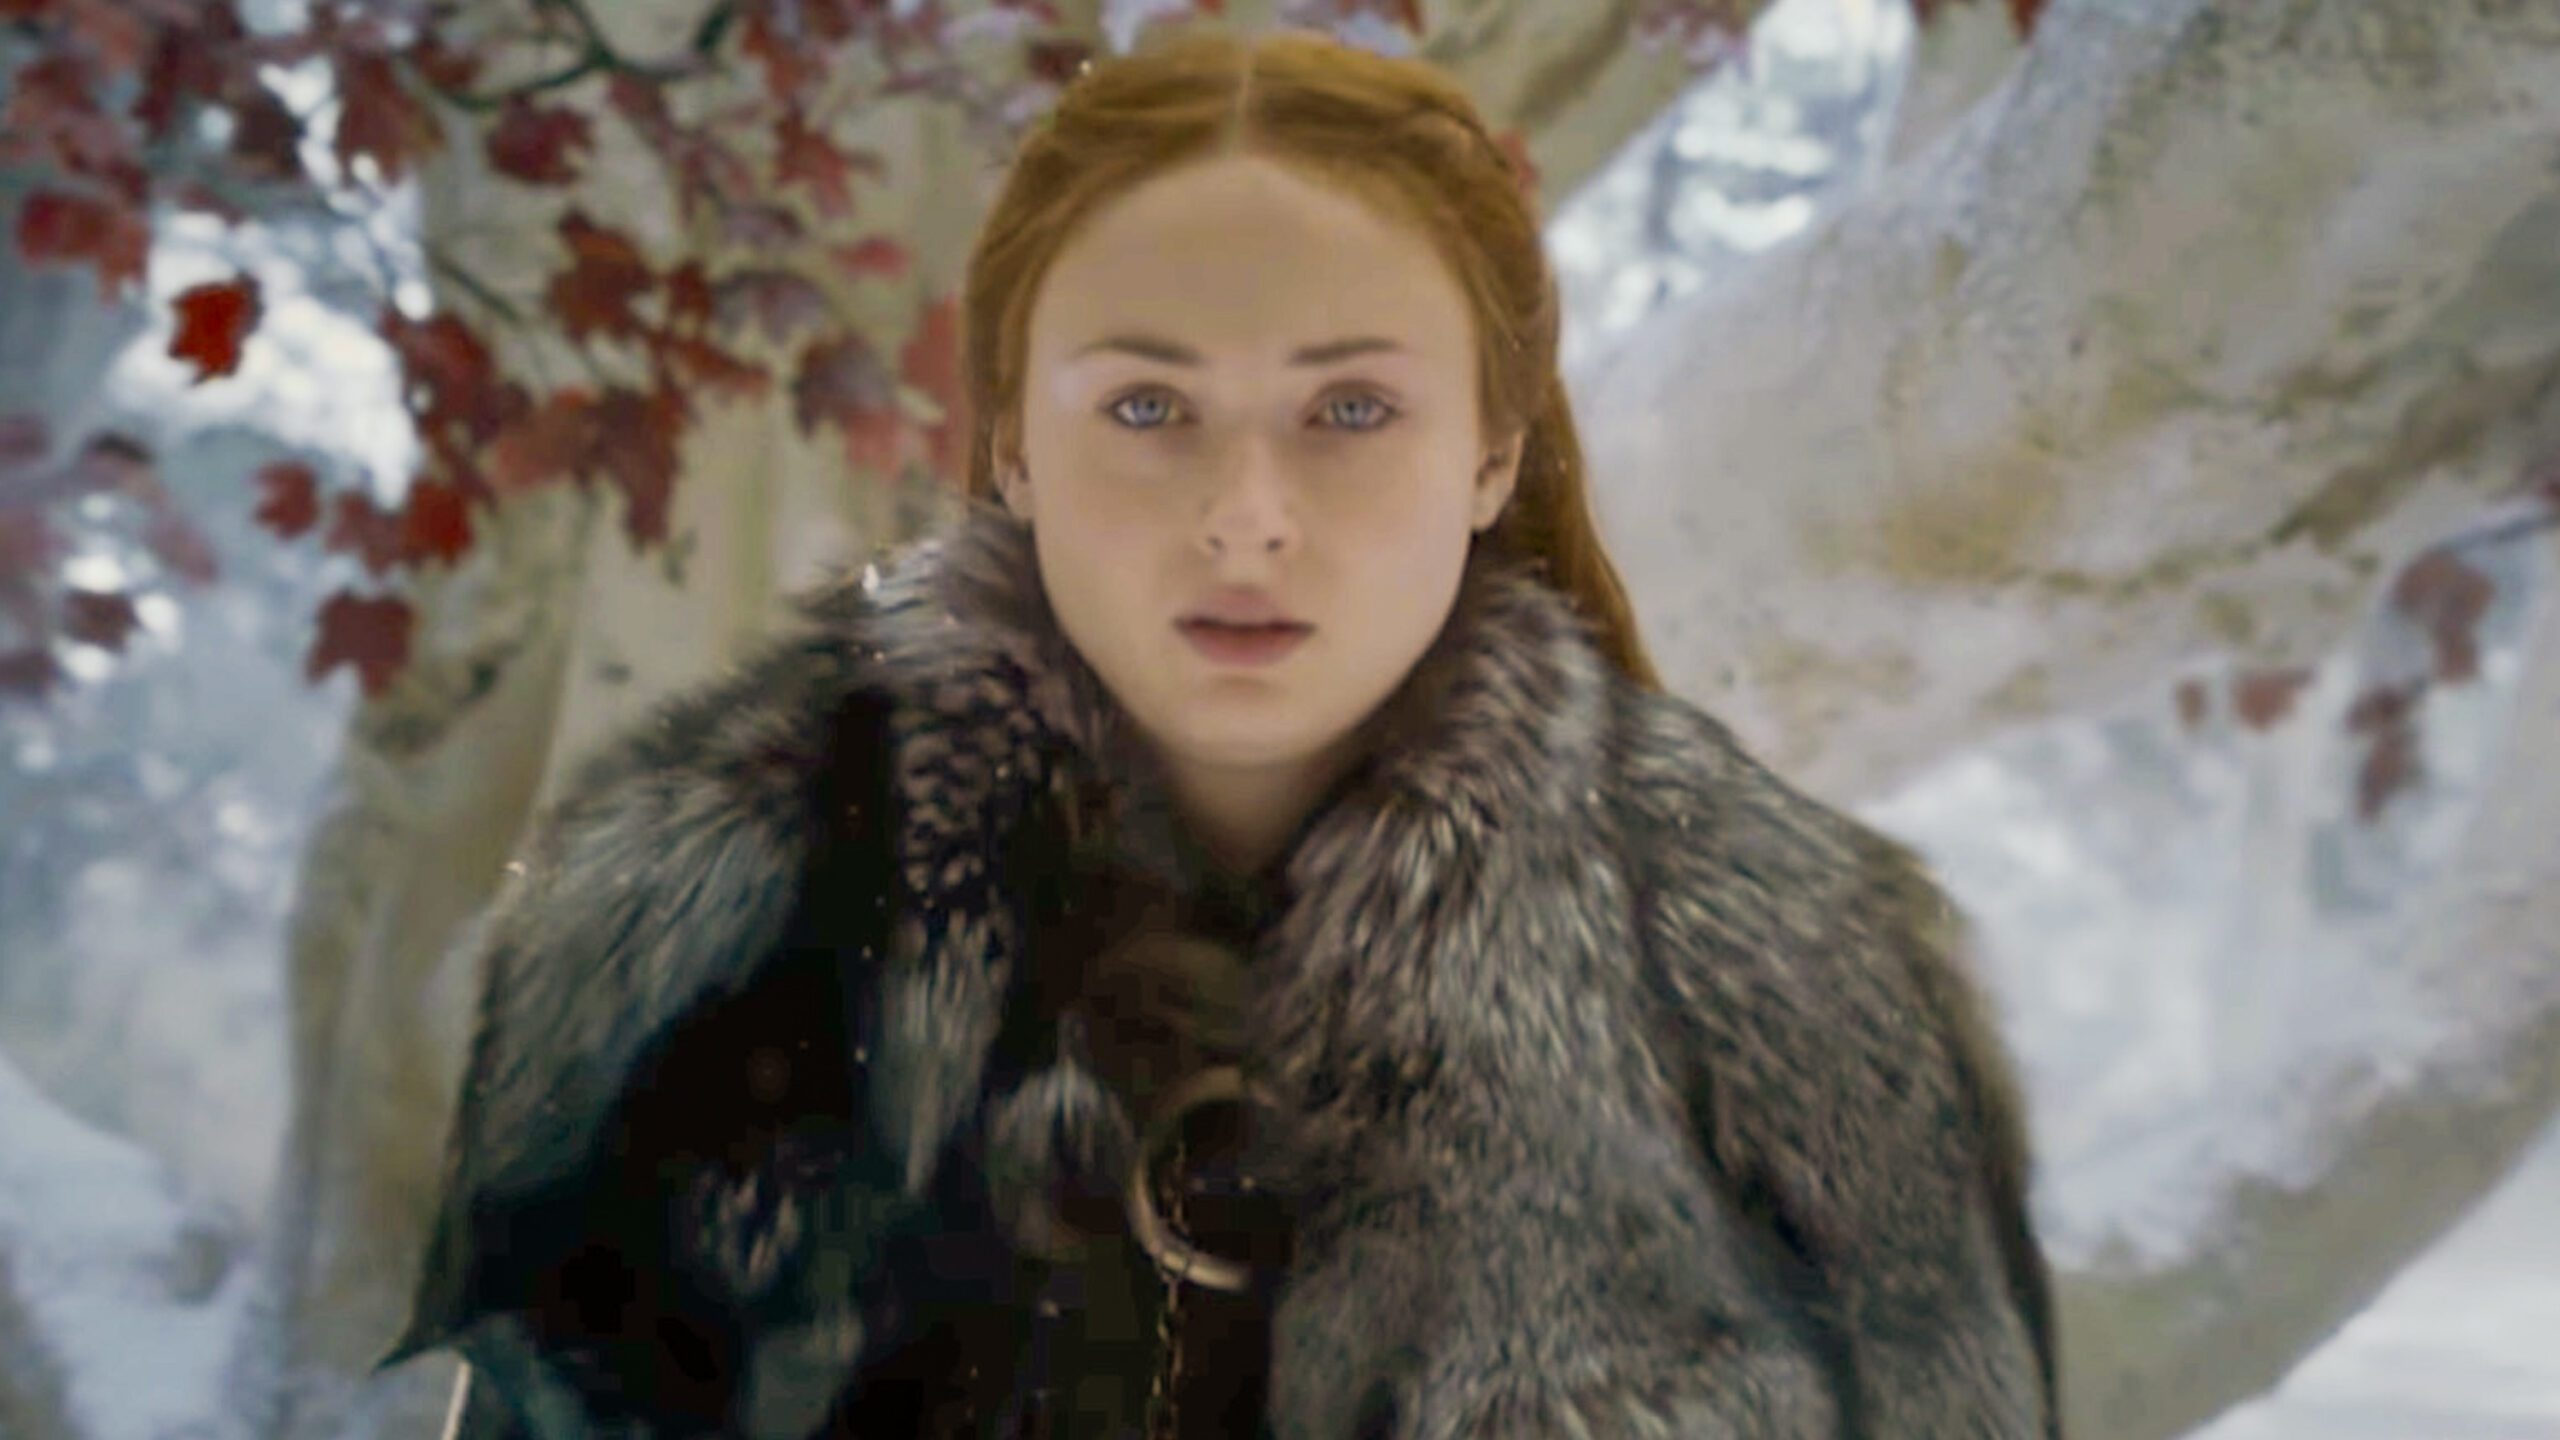 WATCH: Winter is here in new ‘Game of Thrones’ season 7 trailer